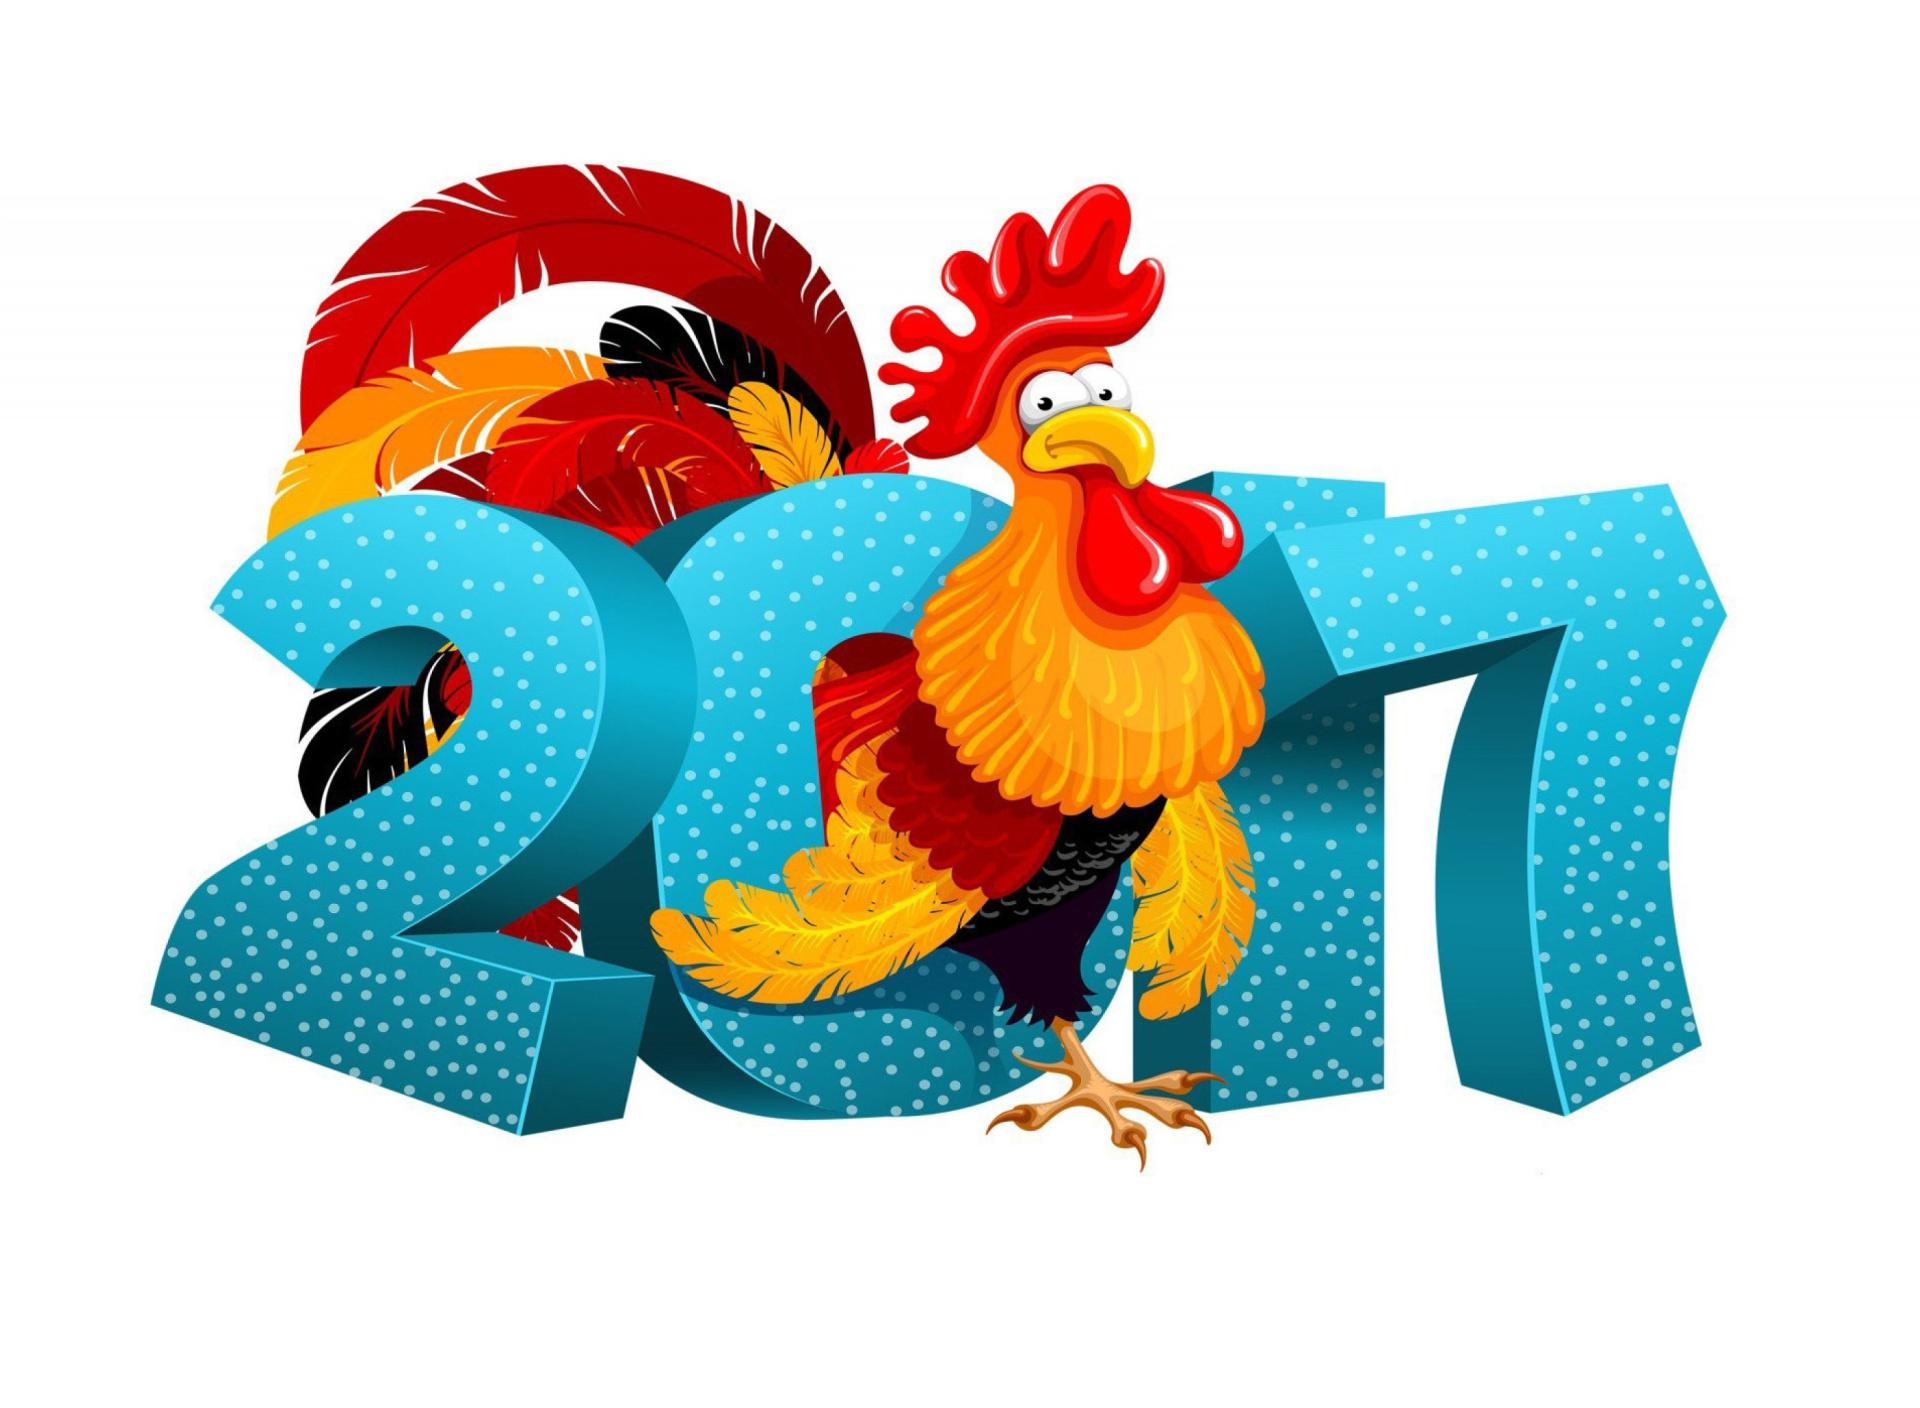 2017 New Year Chinese Horoscope Red Cock Rooster screenshot #1 1920x1408